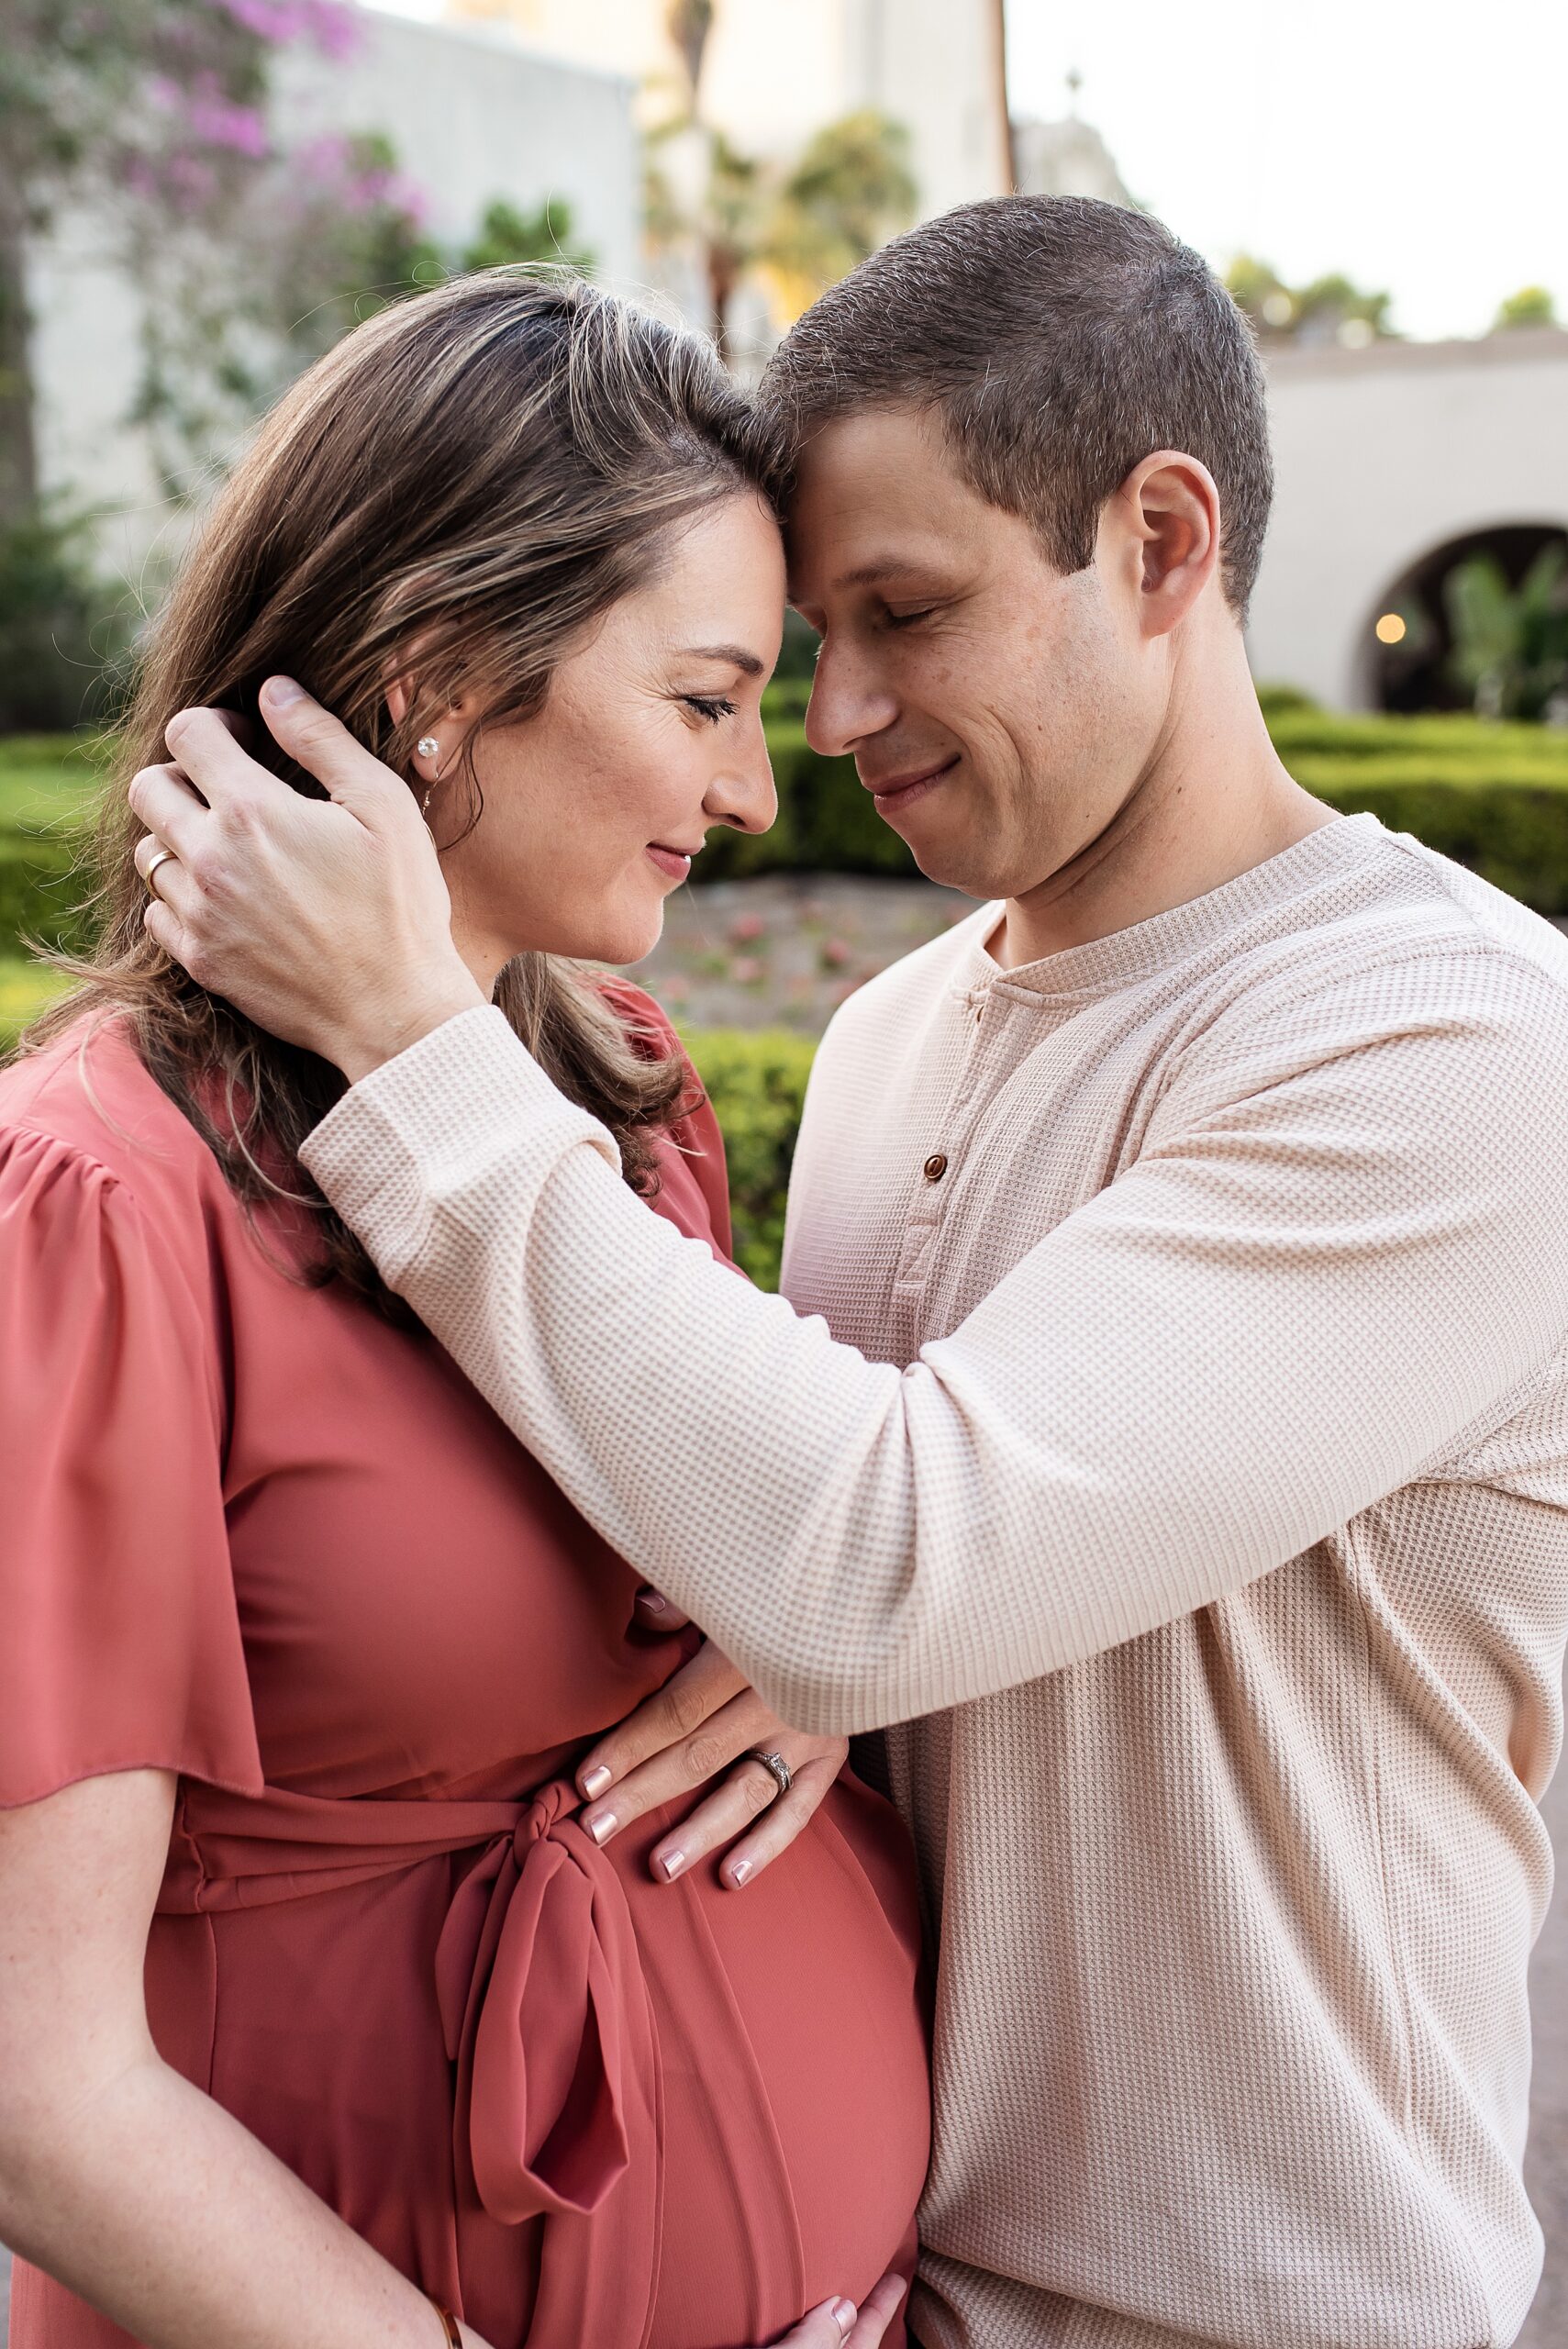 A mom to be holds her bump while pressing foreheads together while standing in a garden